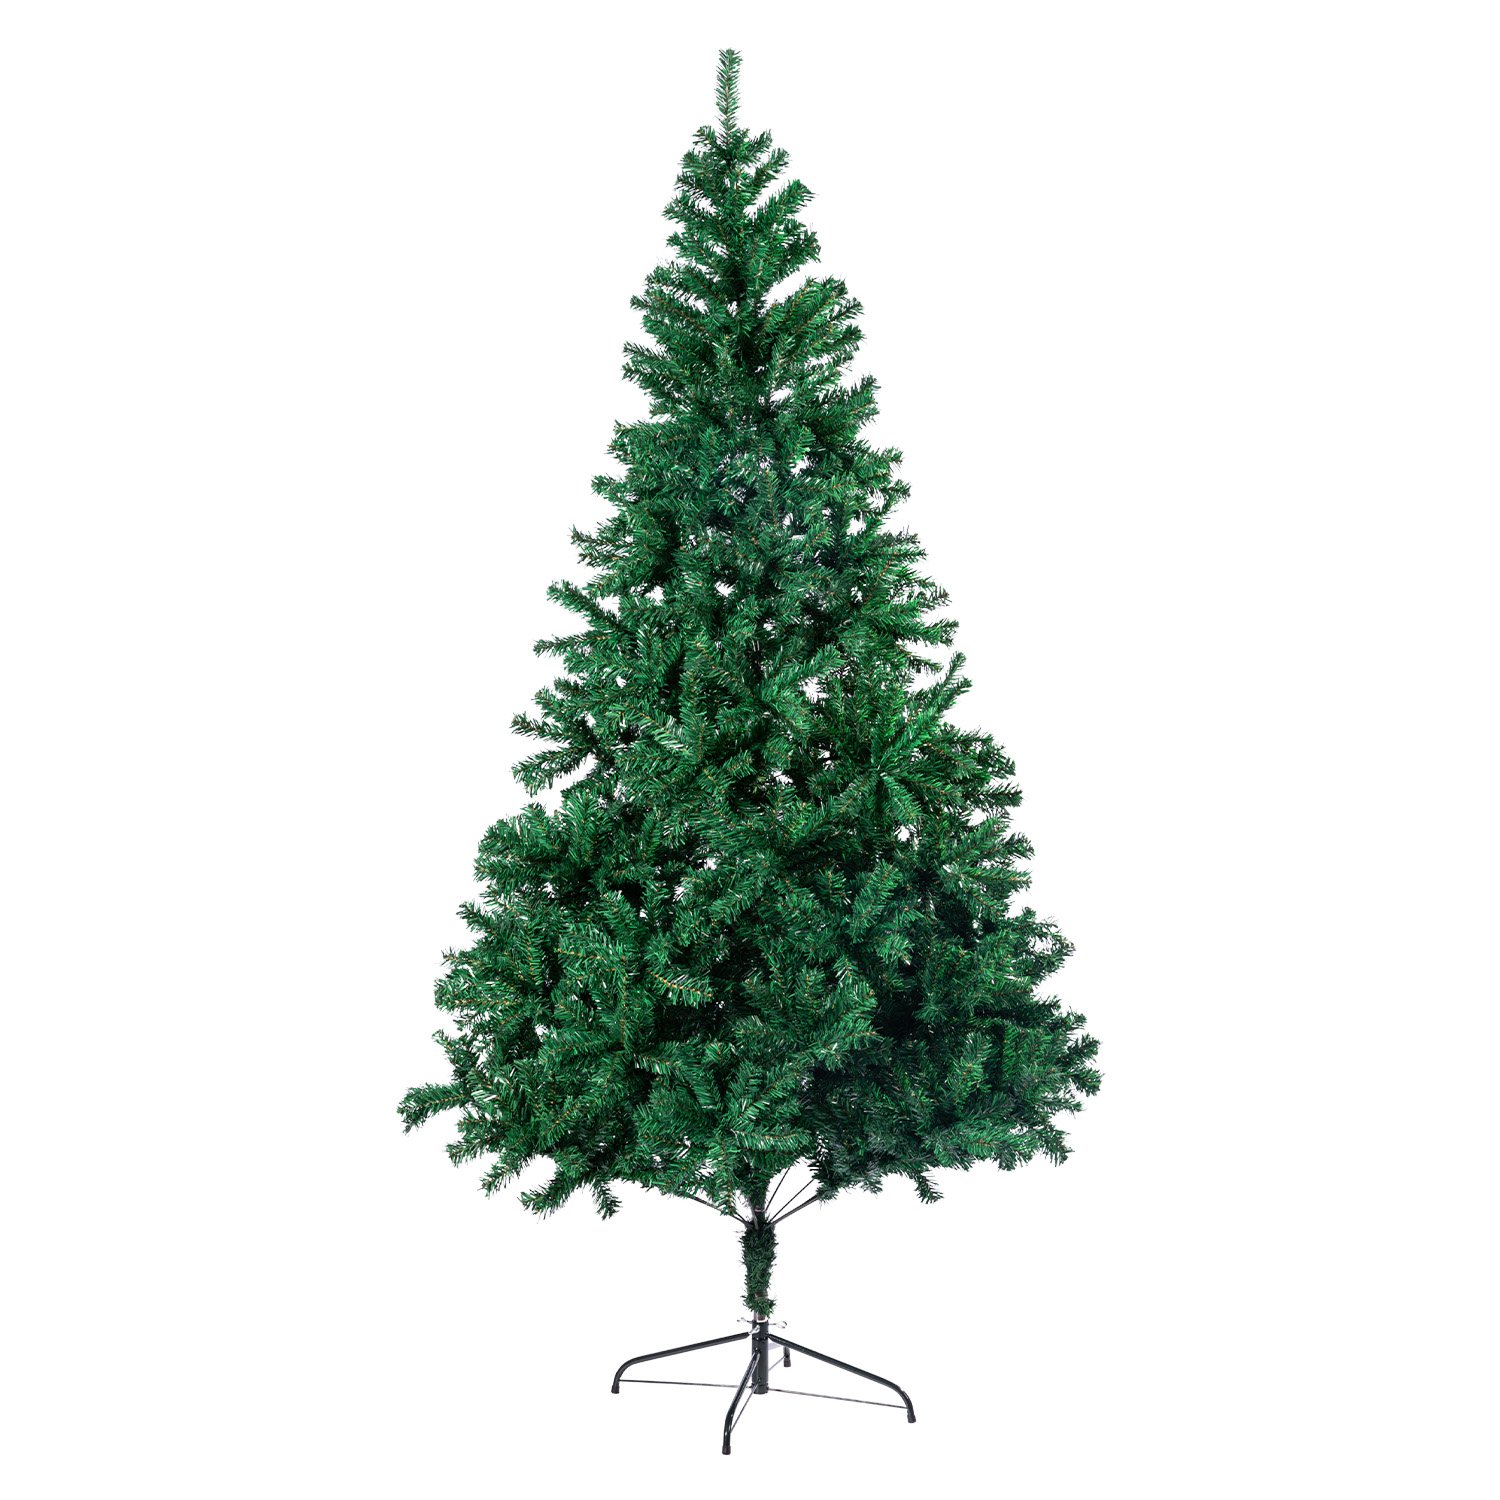 Christabelle Green Artificial Christmas Tree 1.8m - 850 Tips 2